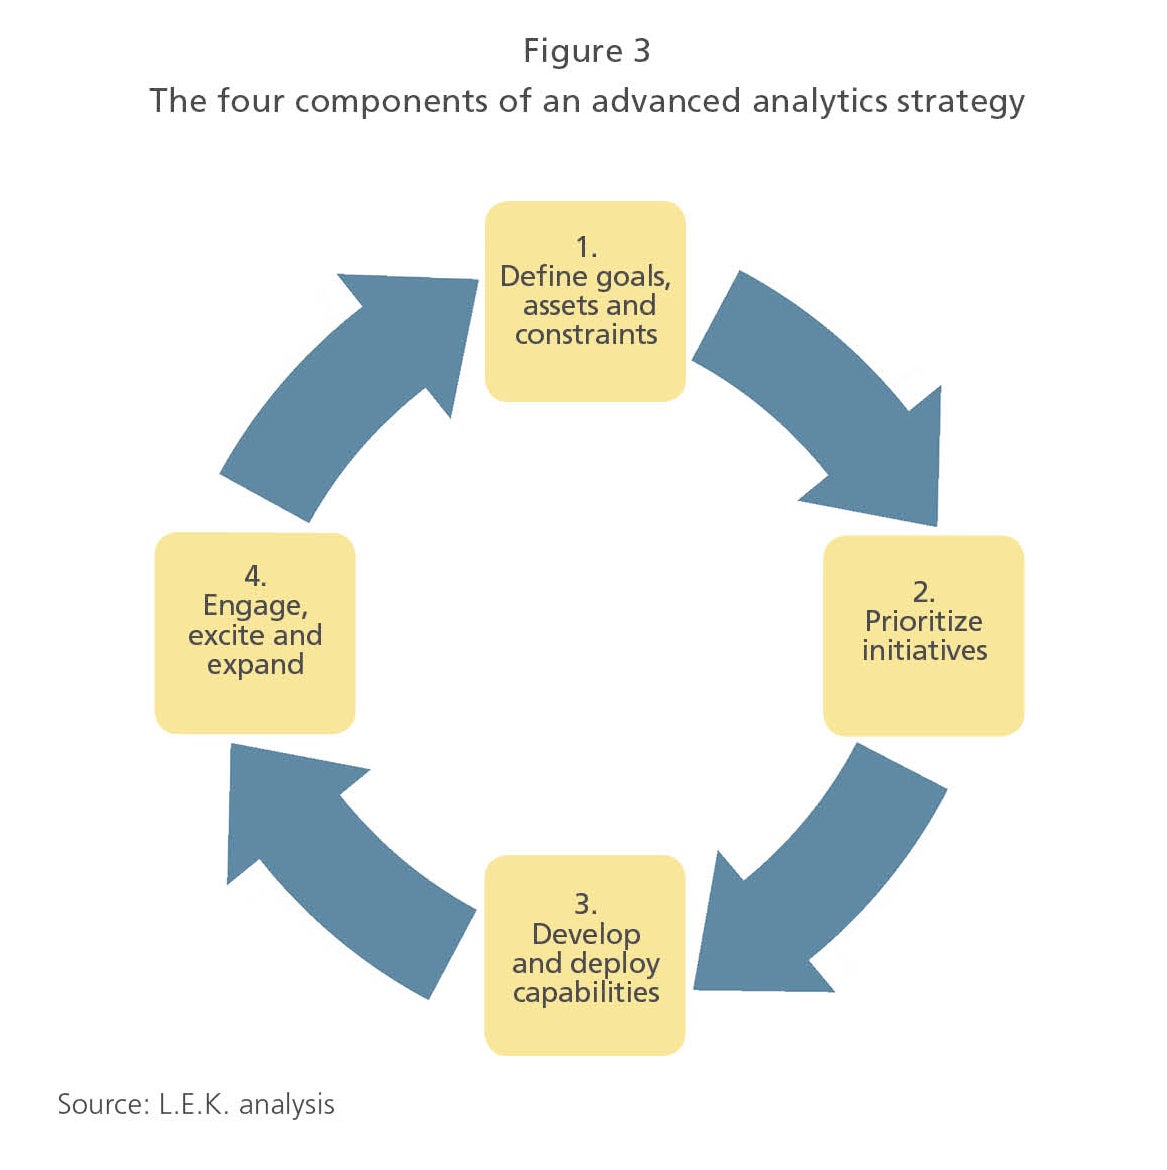 The four components of an advanced analytics strategy